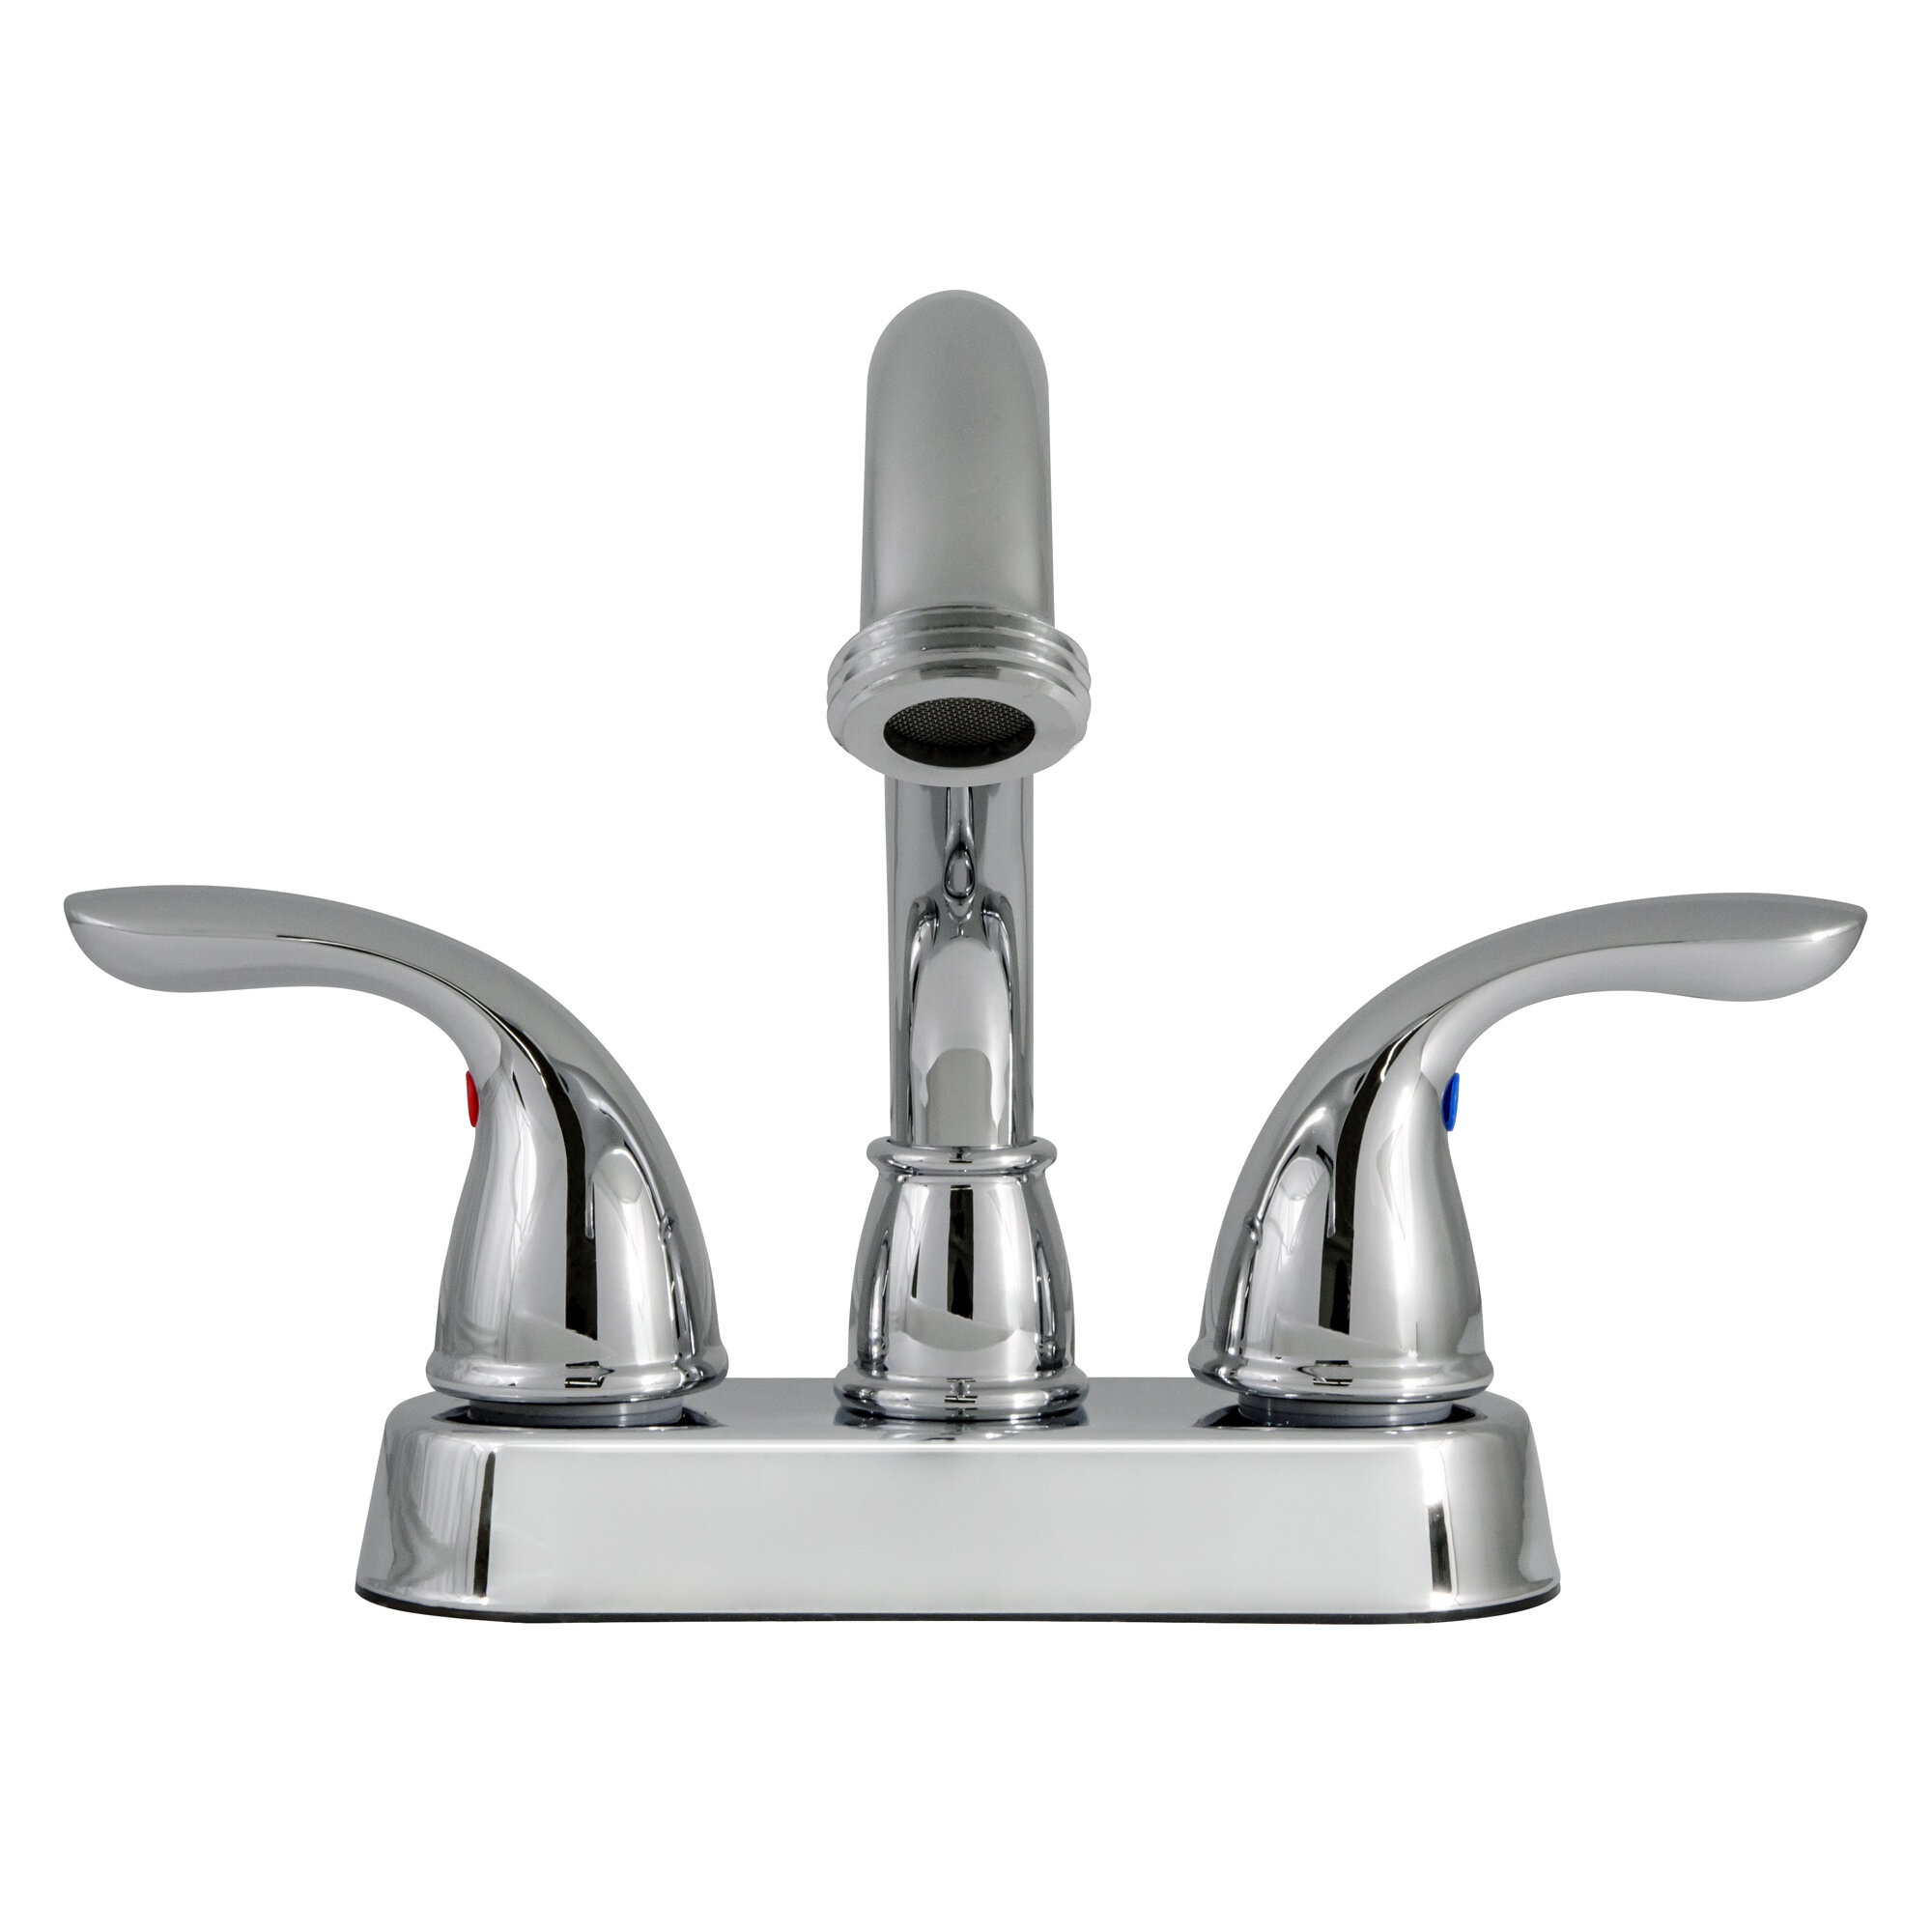 2-handle Laundry Utility Sink Faucet Brass Body Zinc Handles Satin Nickel Finish for sale online